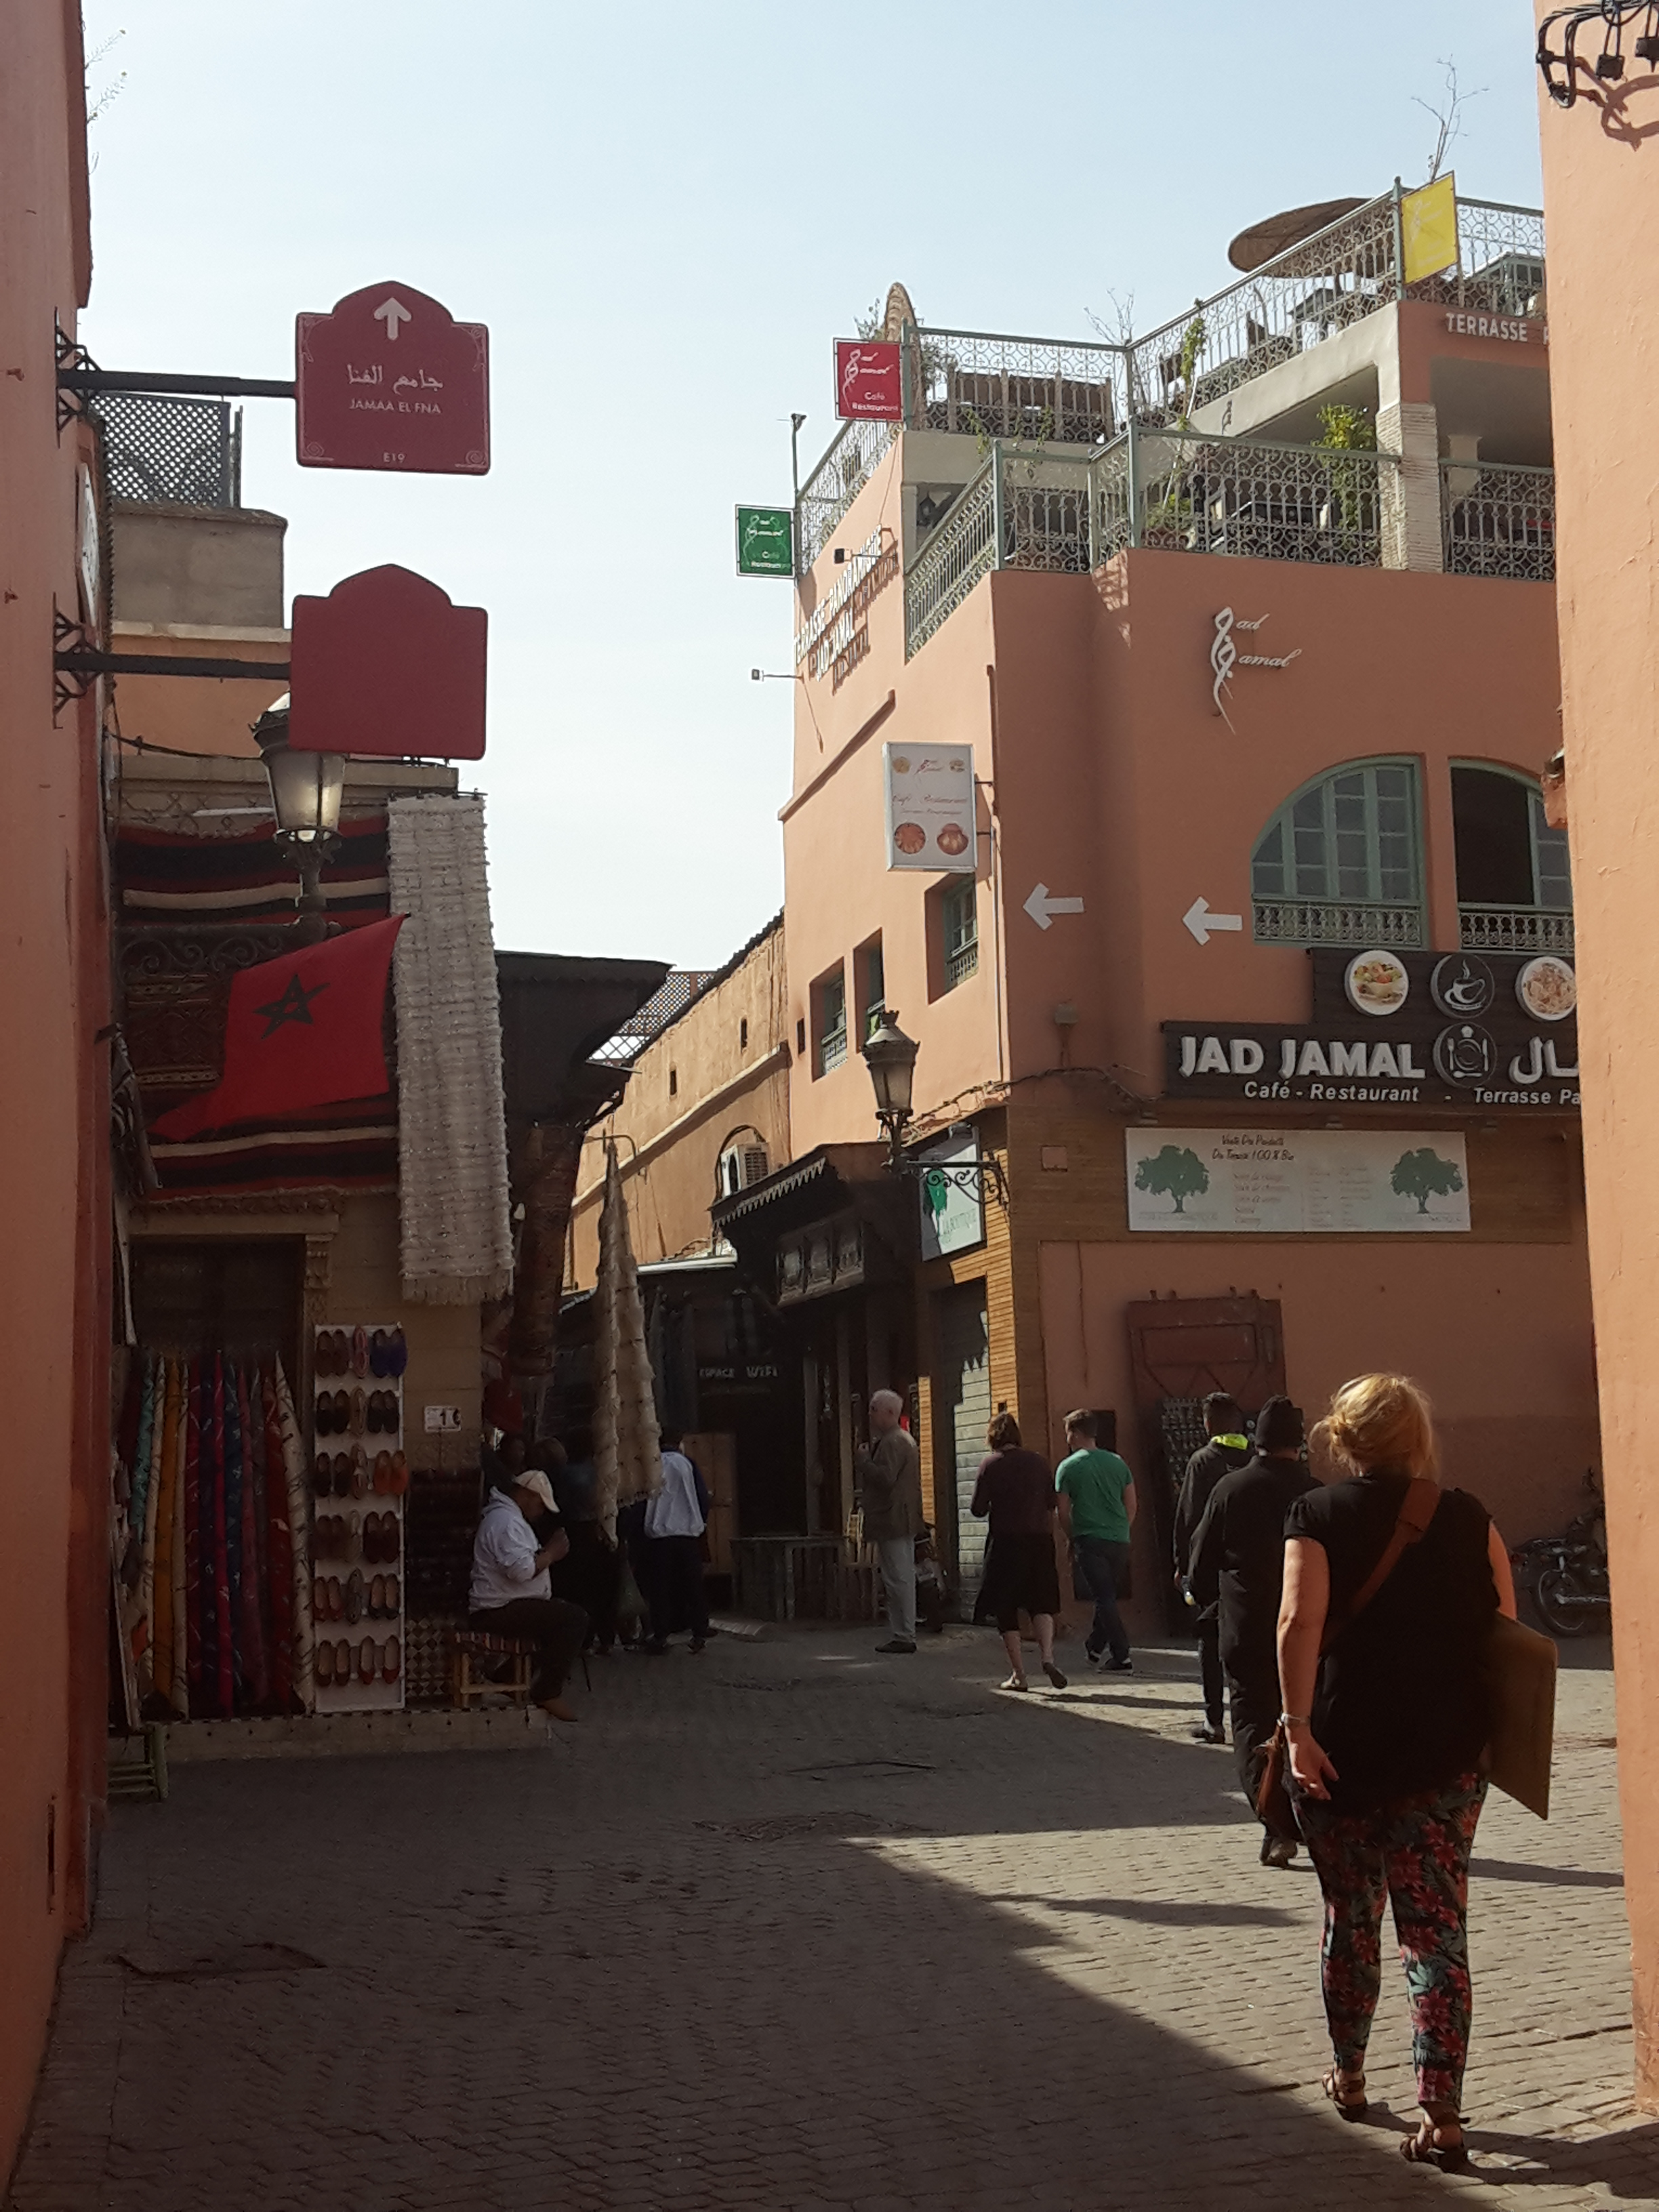 Getting Lost in the Medina of Marrakech